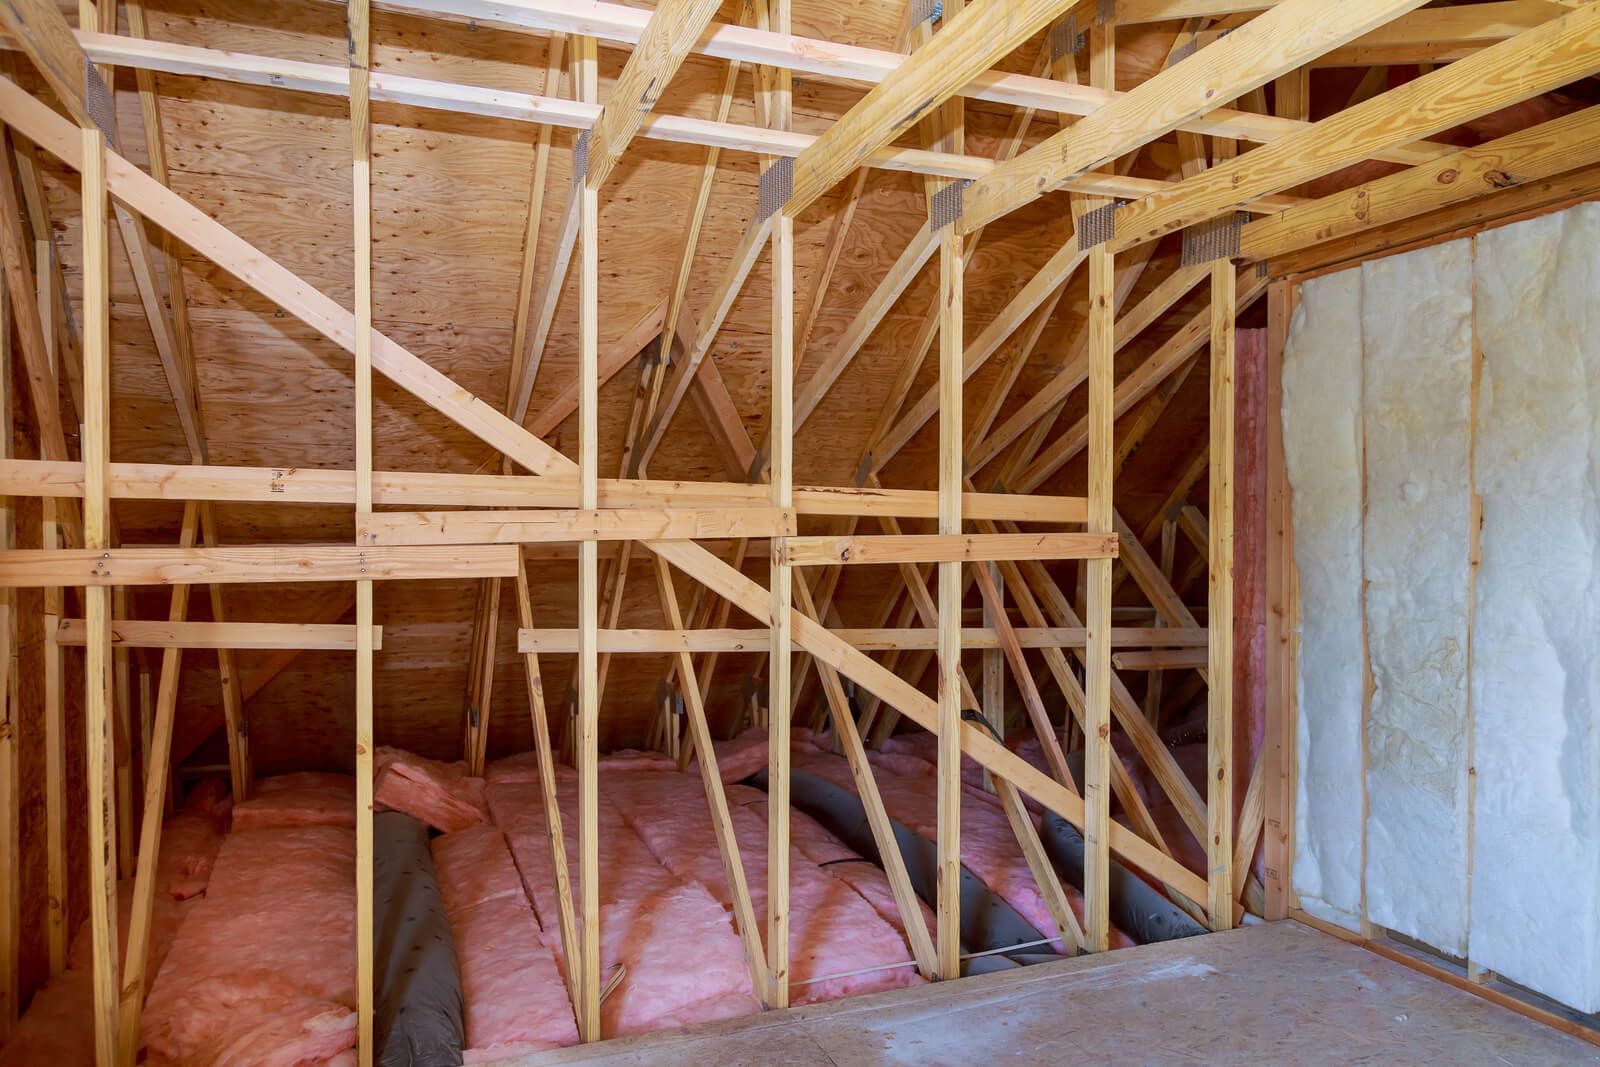 An attic that is ready to have insulation installed into it